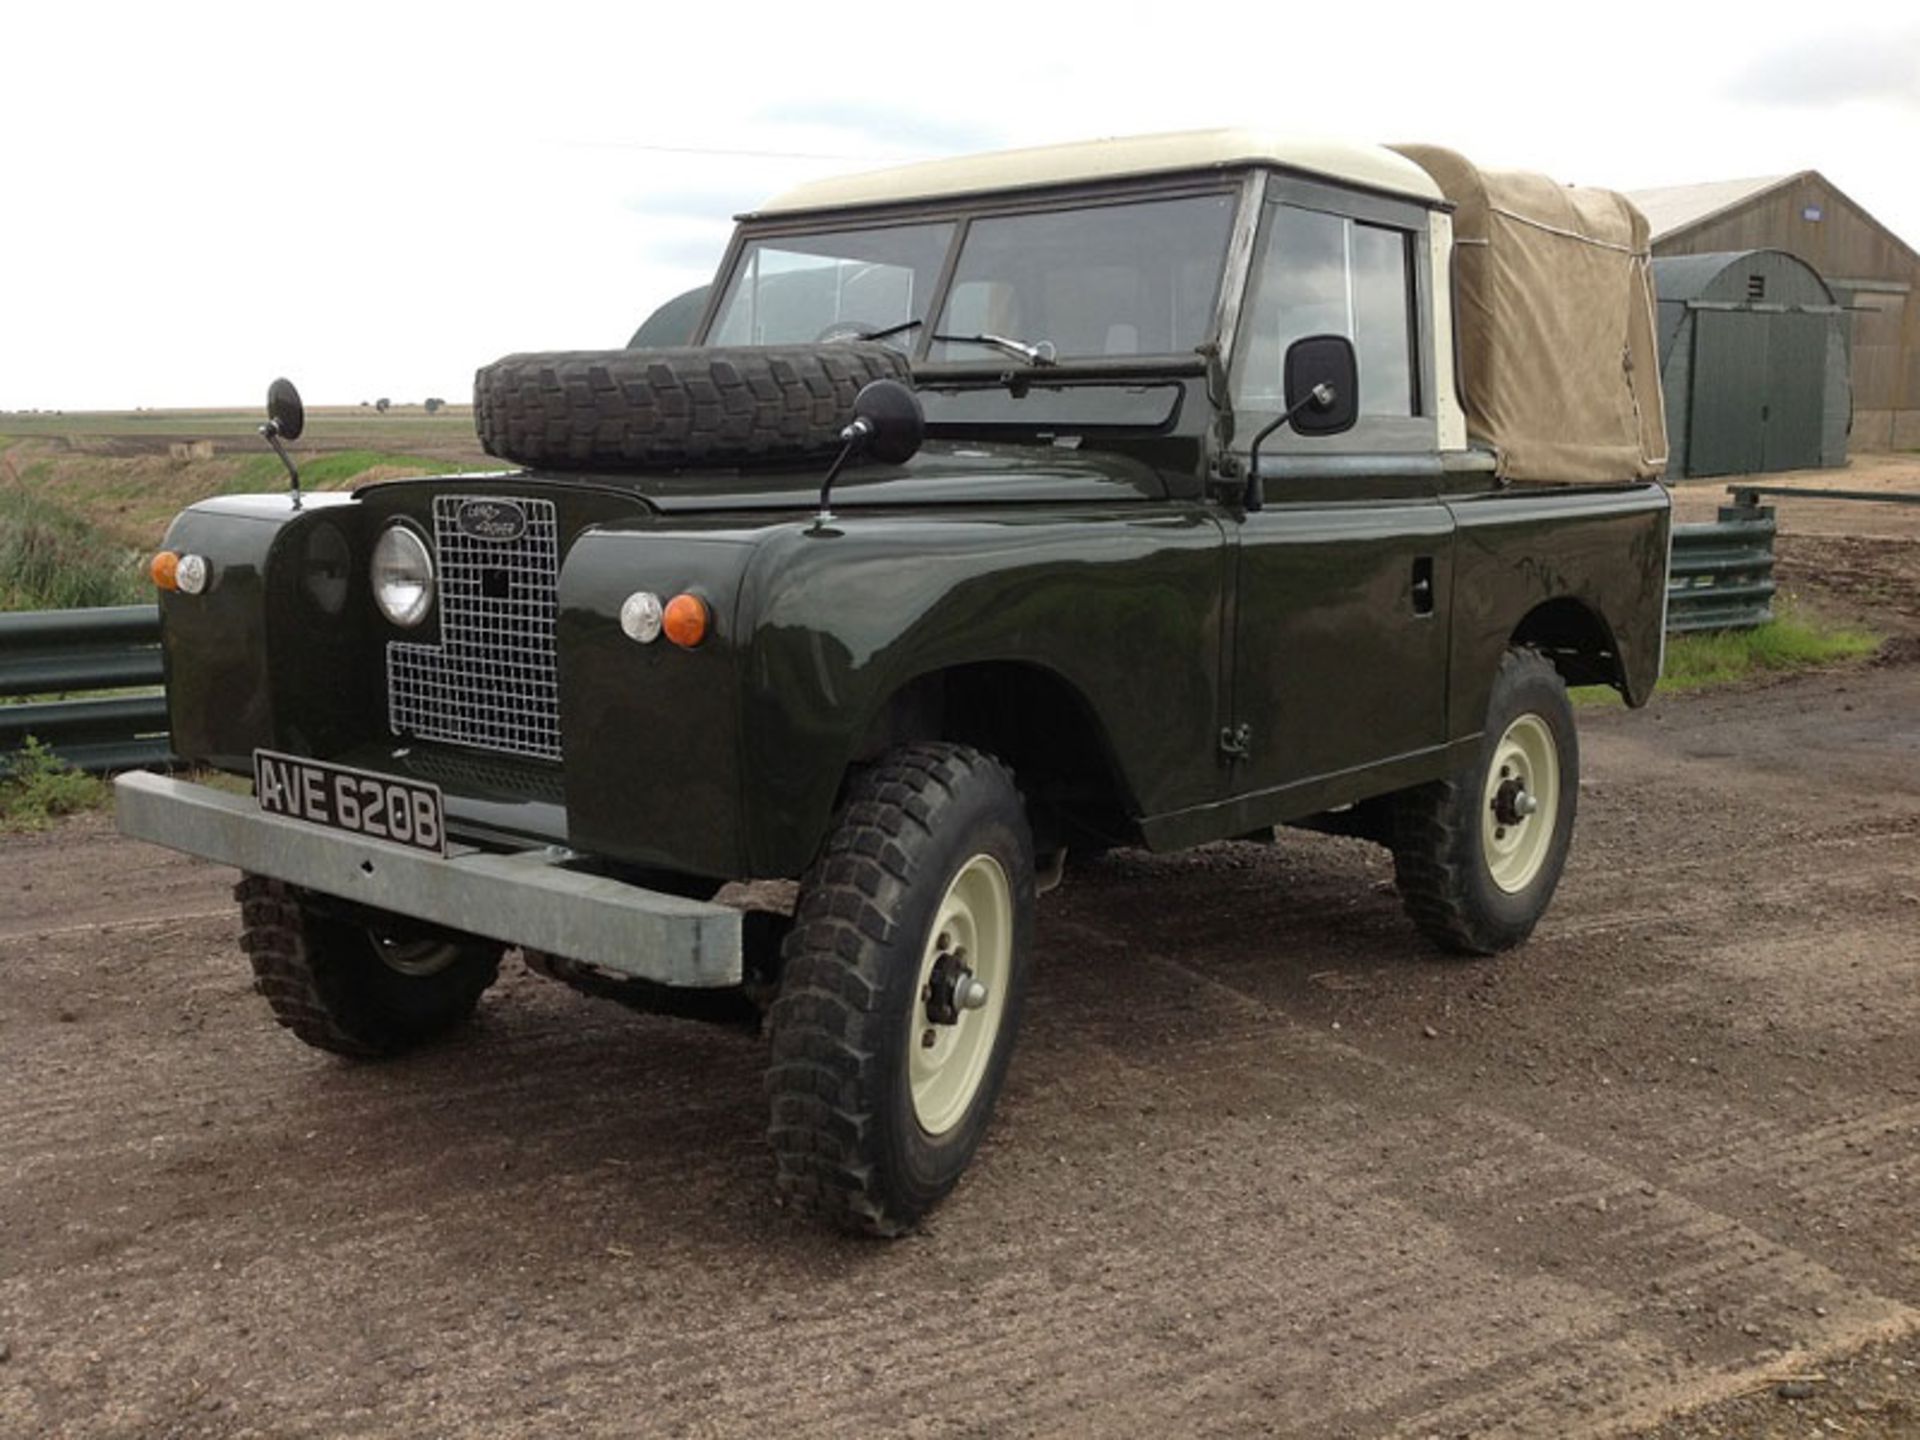 - Restored on a new chassis in 2014

- Finished in Deep Bronze Green with Limestone roof

- MoT to